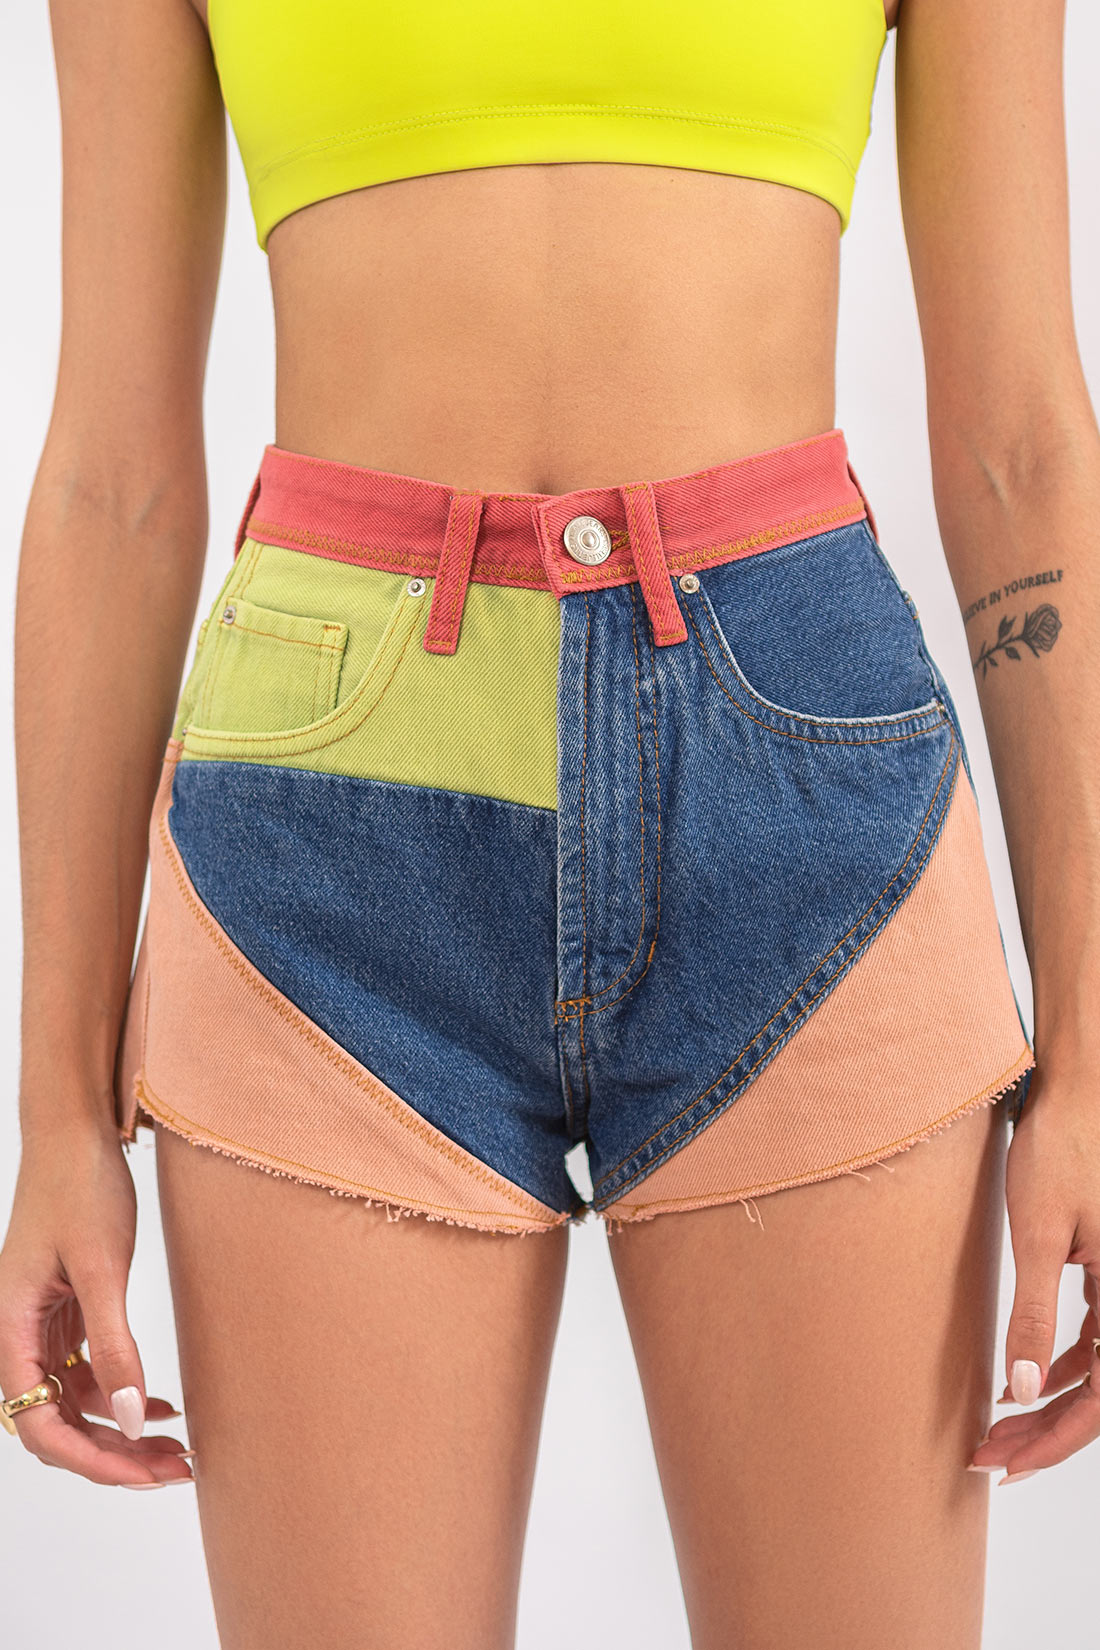 Shorts Jeans Animale Jeans Box Rock Recortes